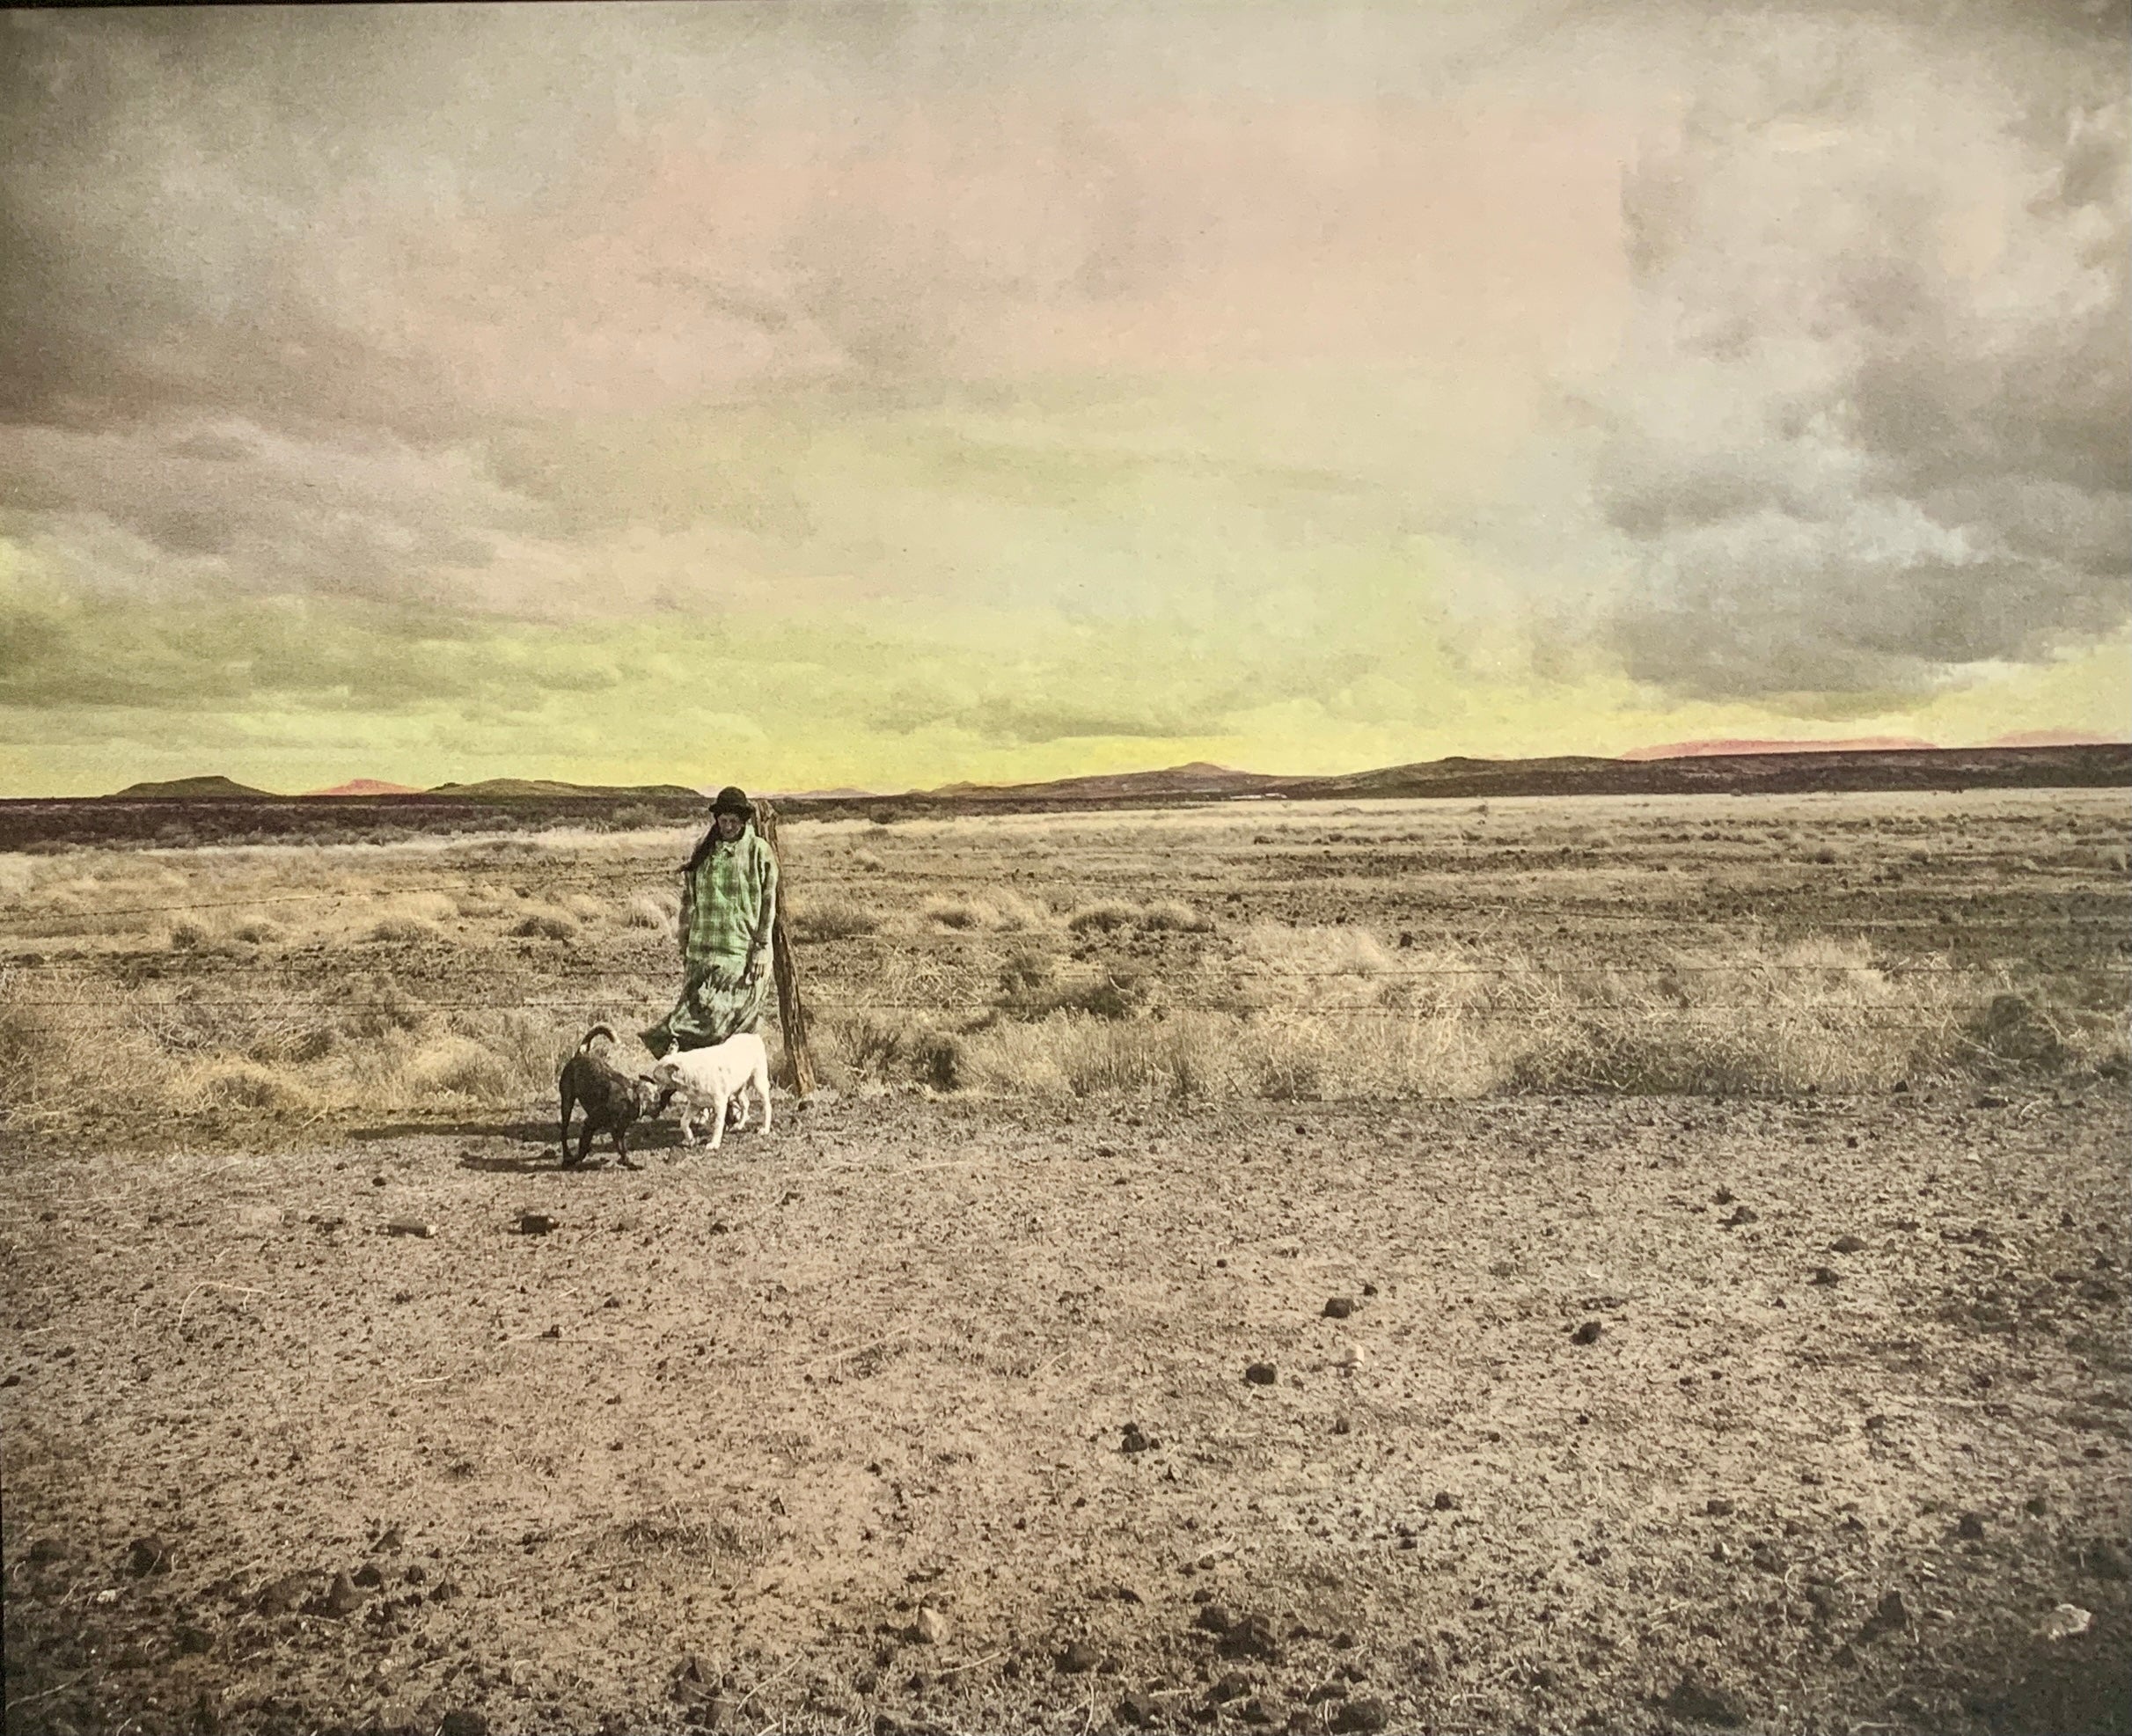 Two blue healer dogs playing with a woman in a flannel shirt standing on the New Mexico plains near Gallup, NM